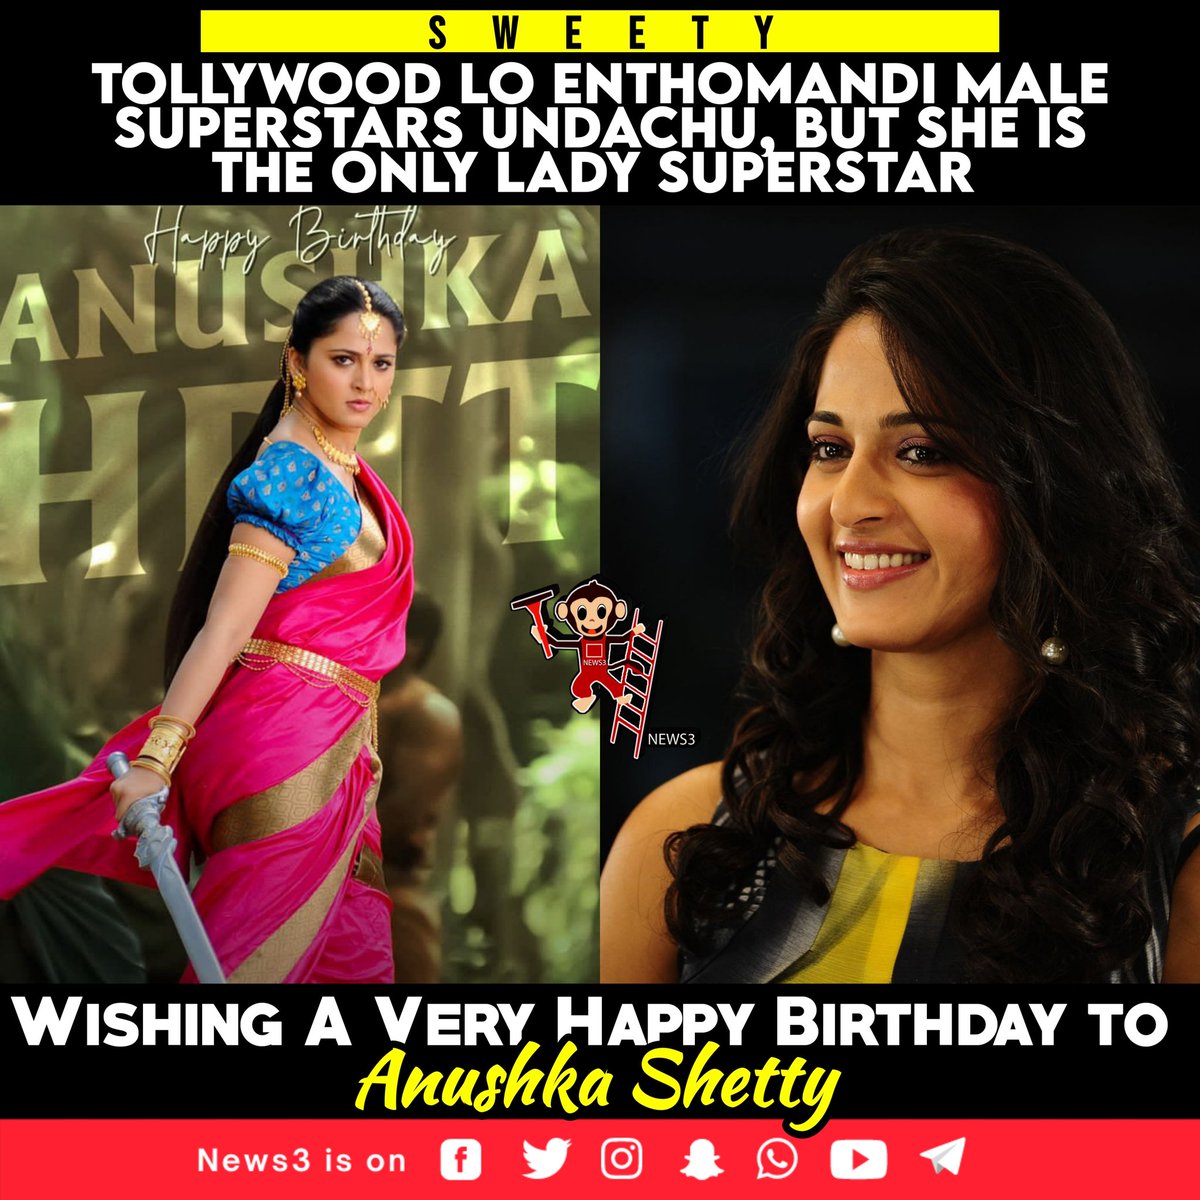 Wishing A Very Happy Birthday to Our #Sweety #AnushkaShetty 🥳

#HappyBirthdayAnushkaShetty #HappyBirthdayAnushka #HBDAnushkaShetty